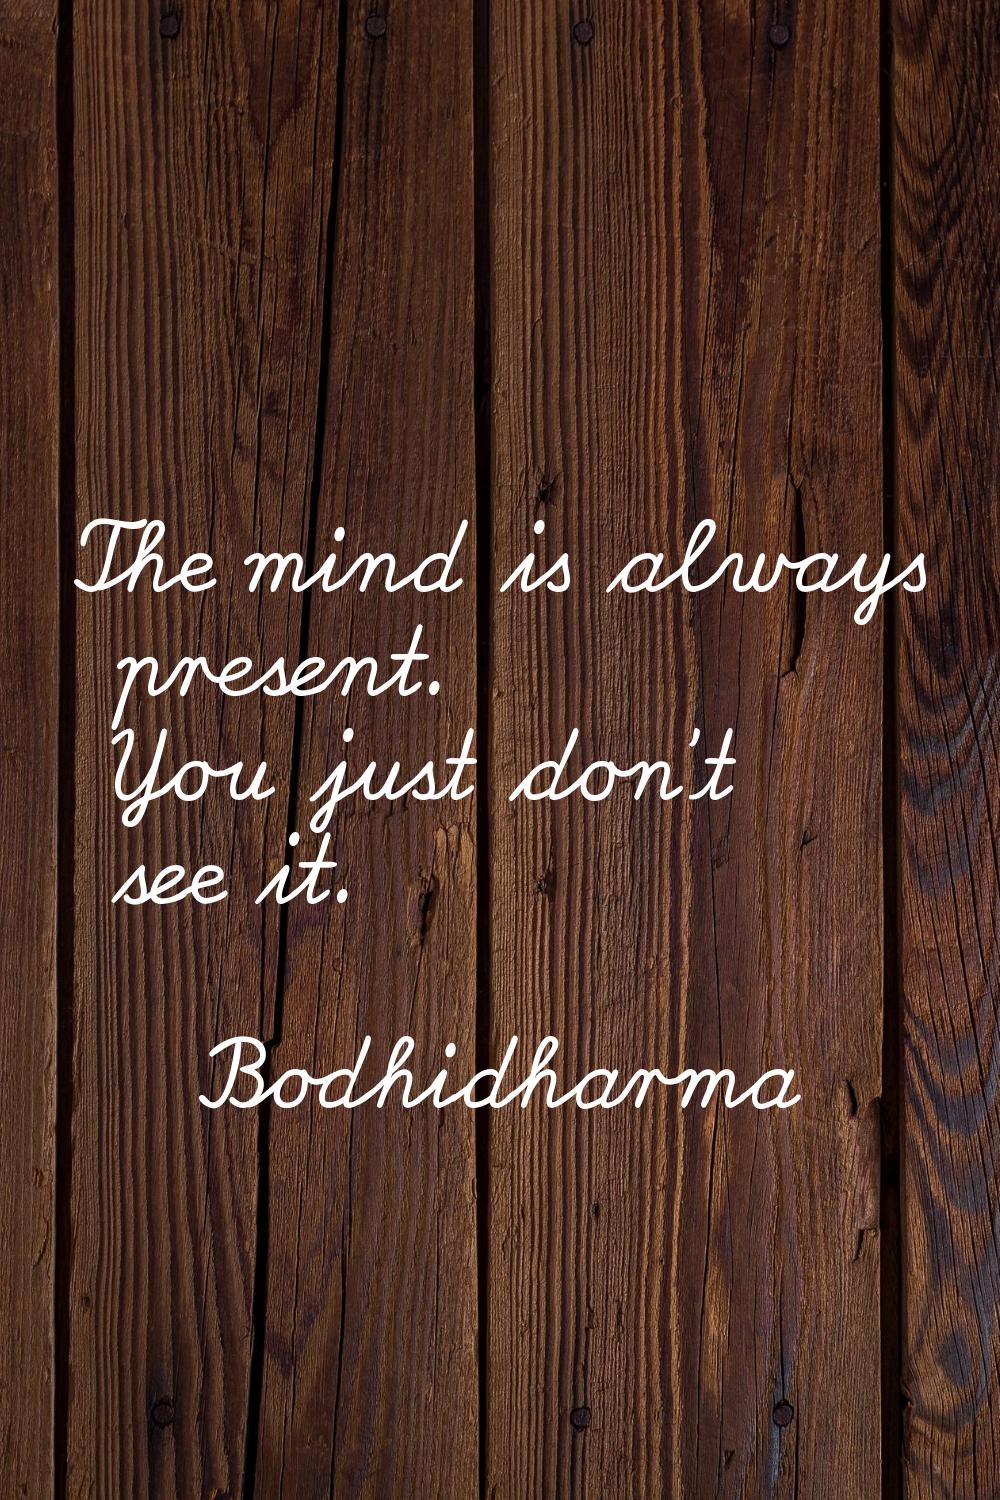 The mind is always present. You just don't see it.